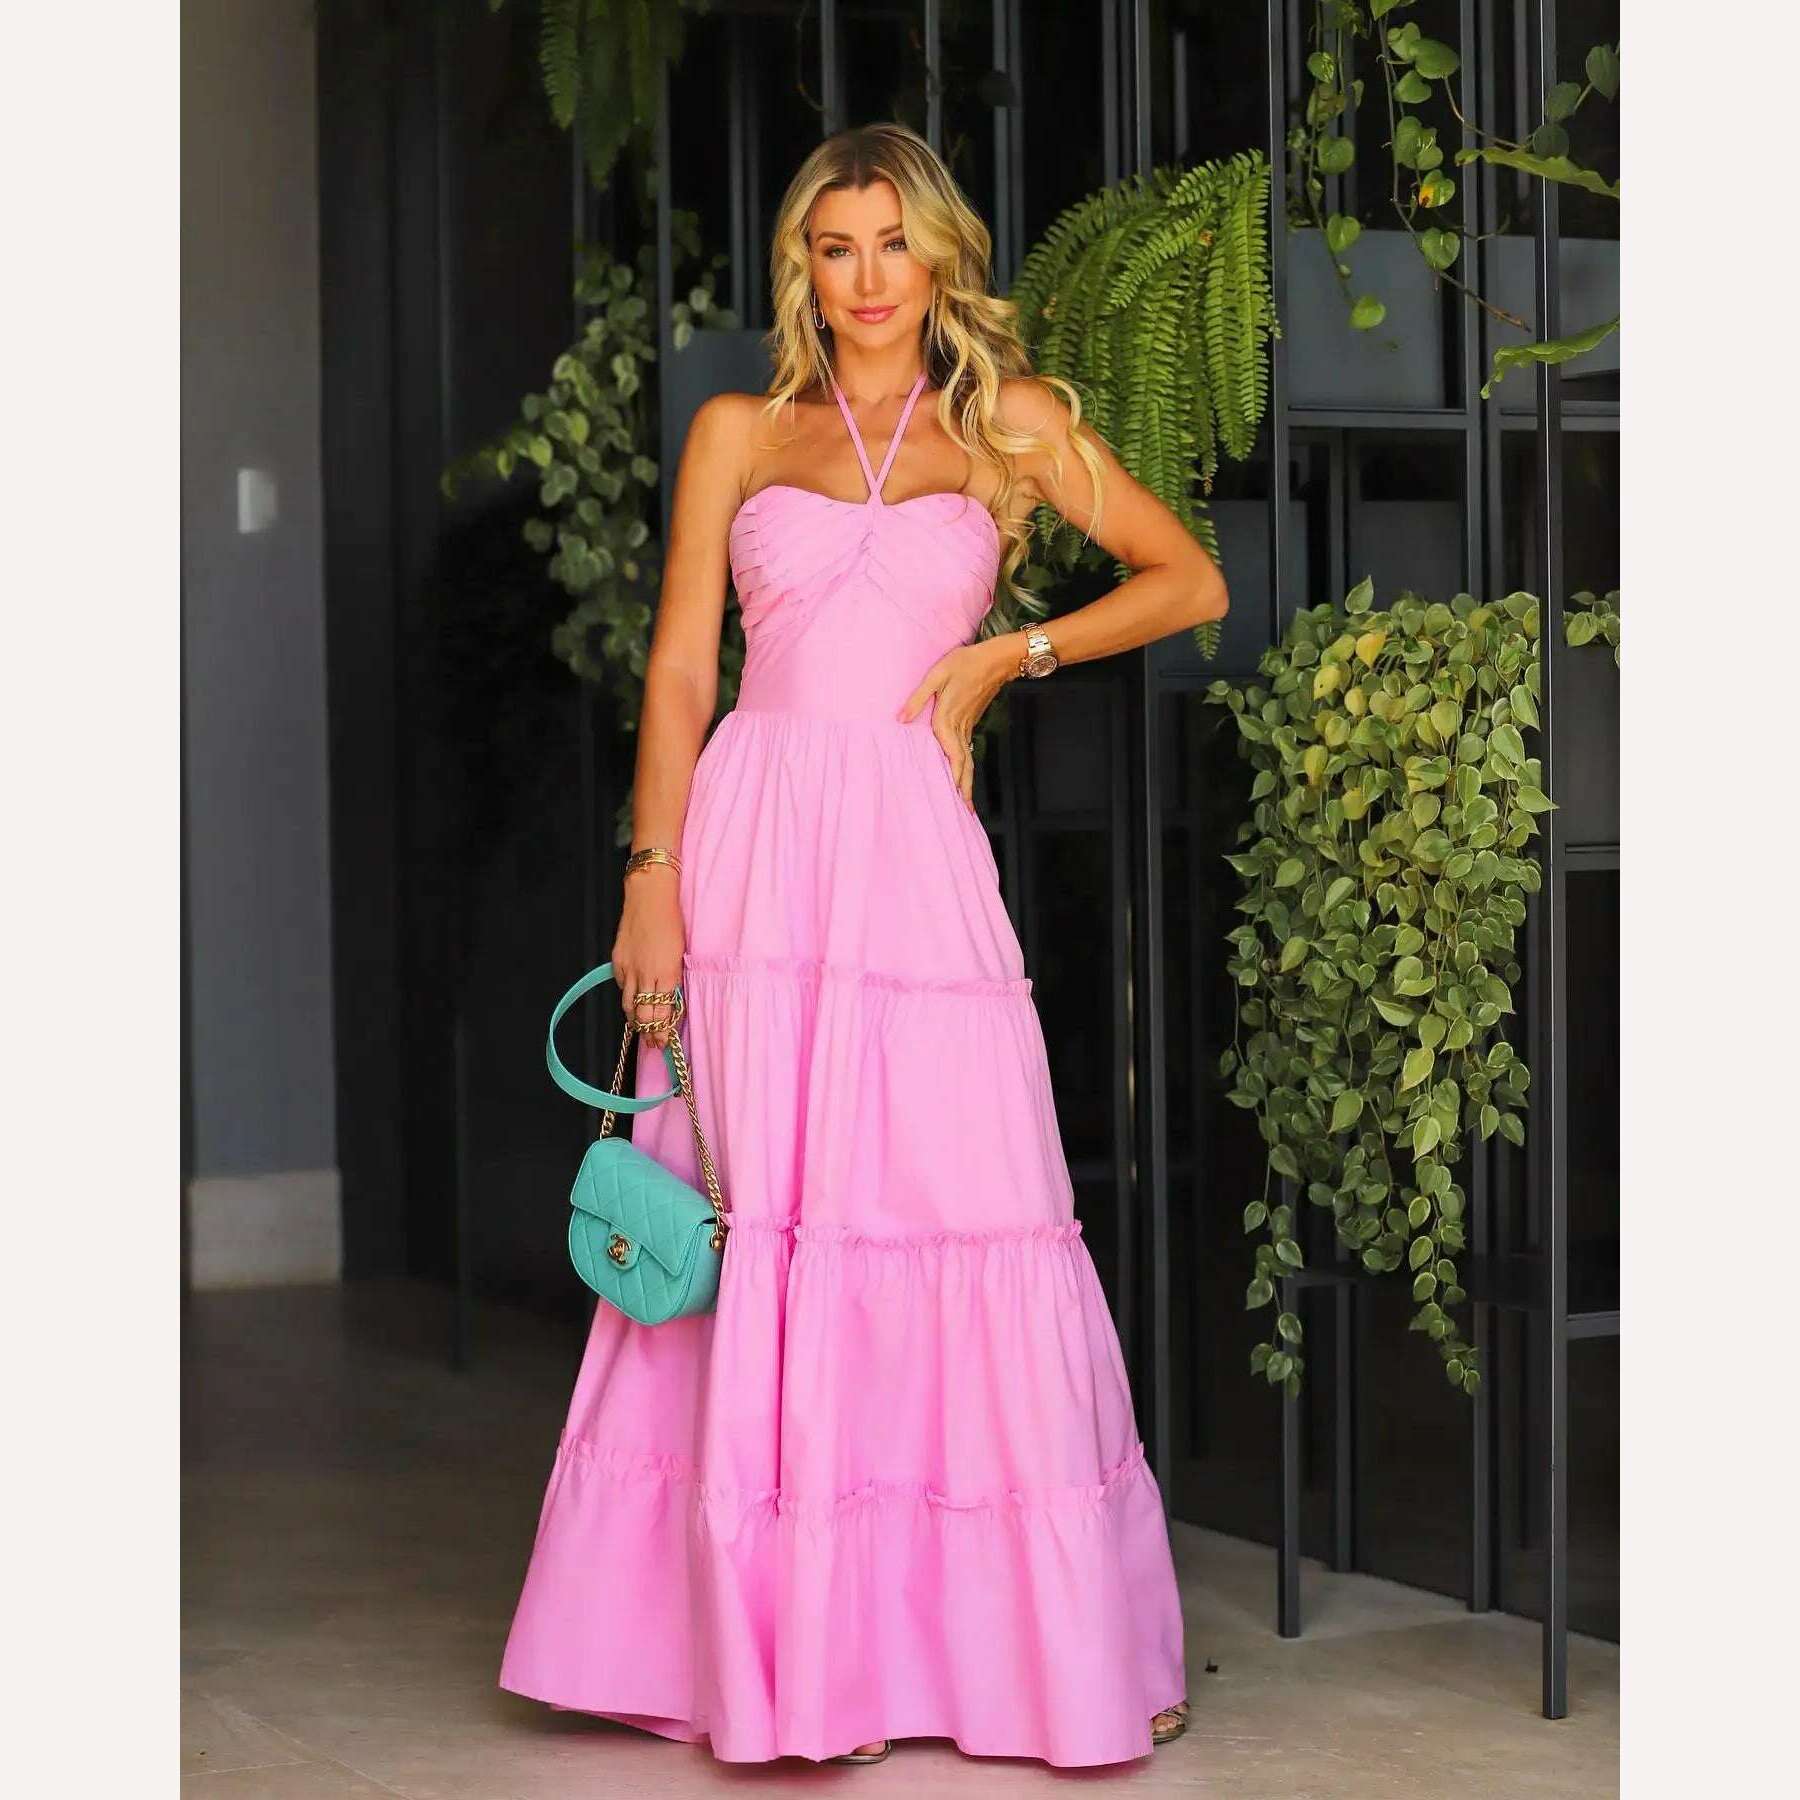 KIMLUD, 2023 Summer New Fashion Women Dresses Elegant Party Female Evening Dress Sexy Women's Clothing Chic Robes, PI23629P1 / S, KIMLUD Women's Clothes